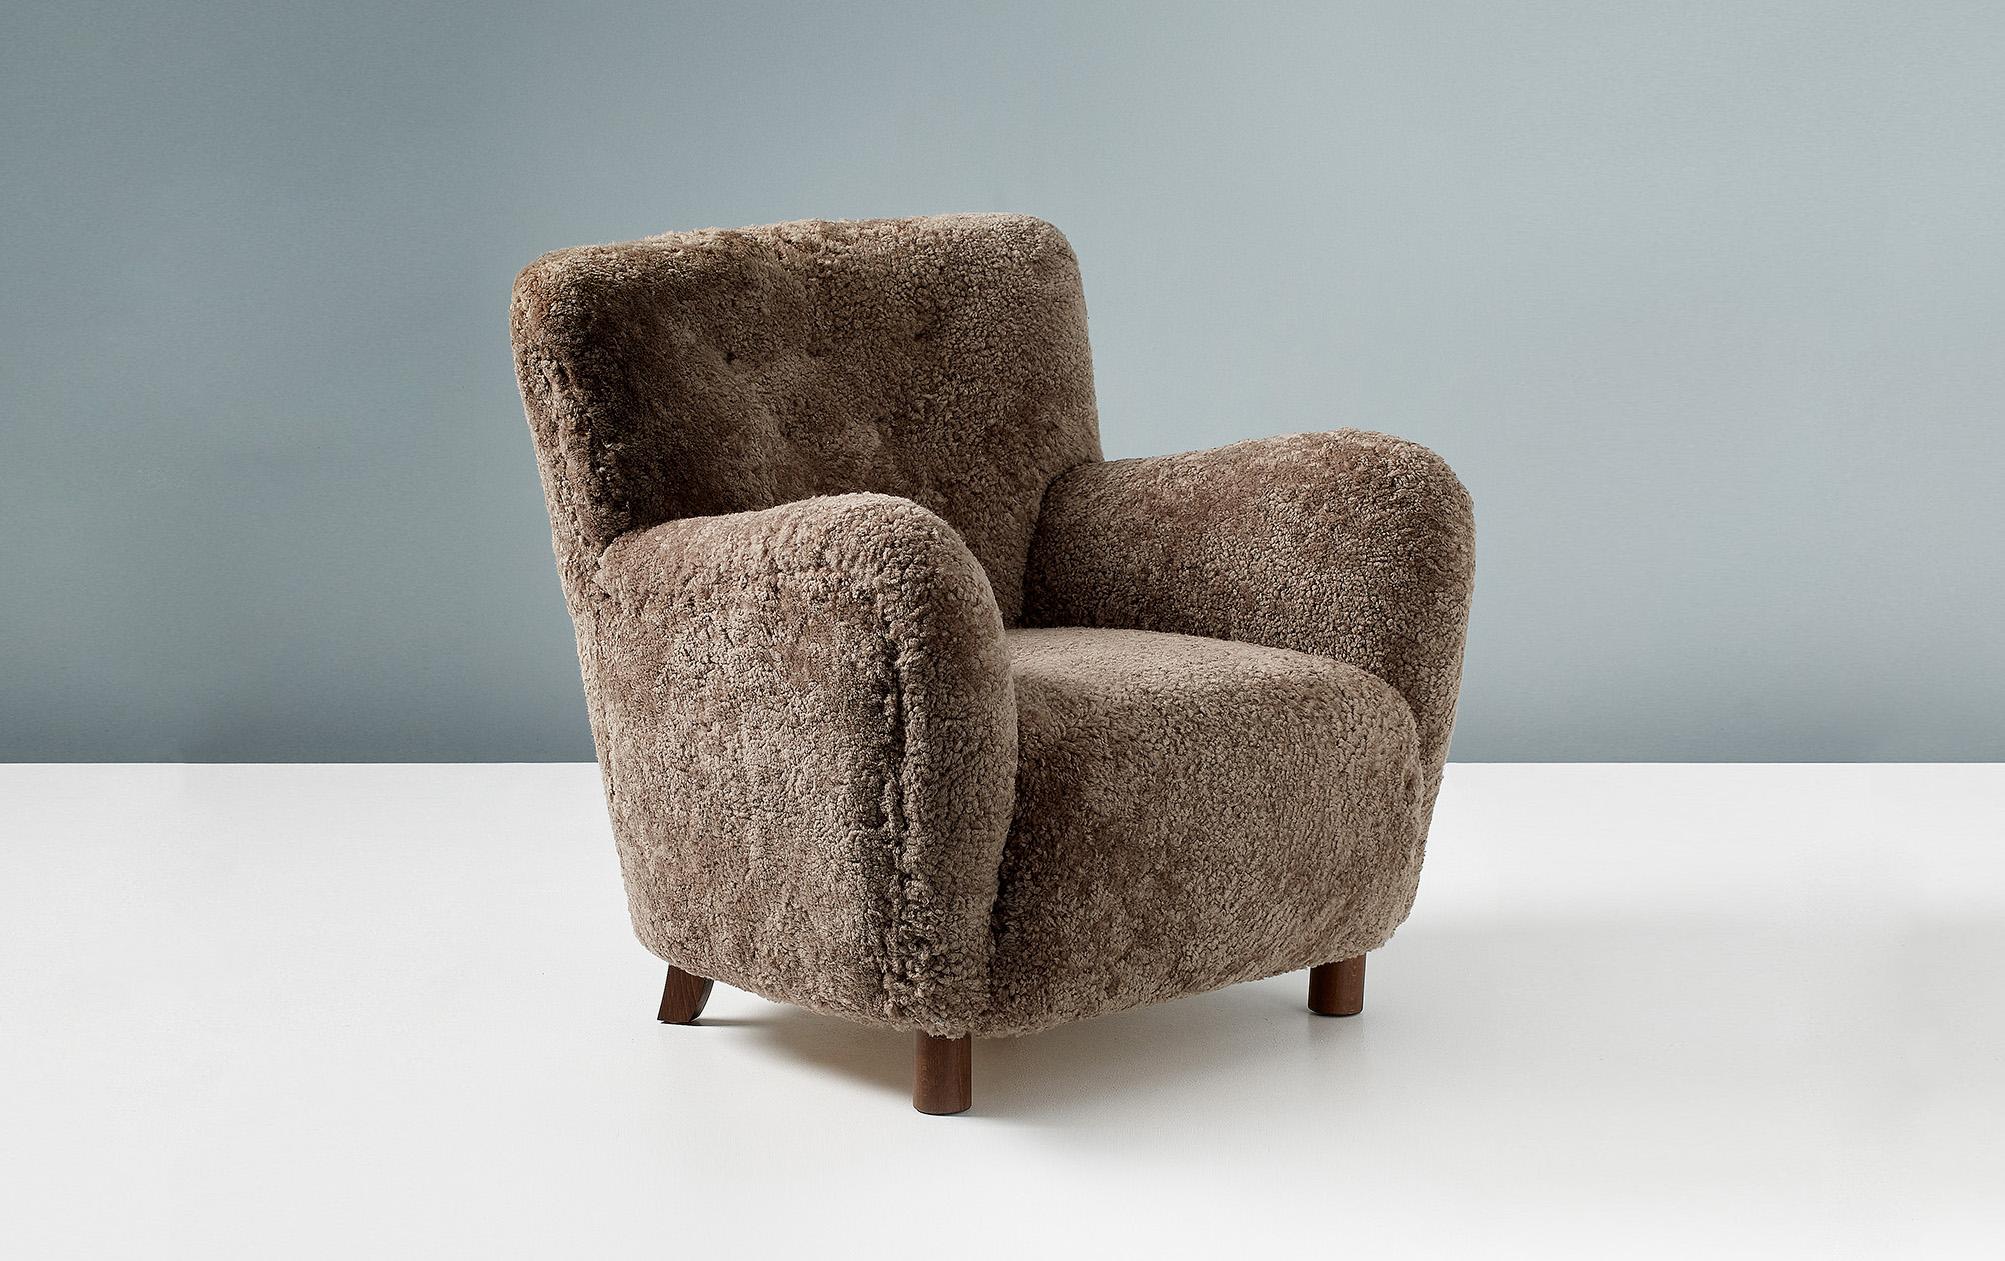 Dagmar Design

Model 54 lounge chair & Ottoman set

A custom made lounge chair and ottoman developed and hand-made at our workshops in London using the highest quality materials. The 54 chair is available to order in a range of different